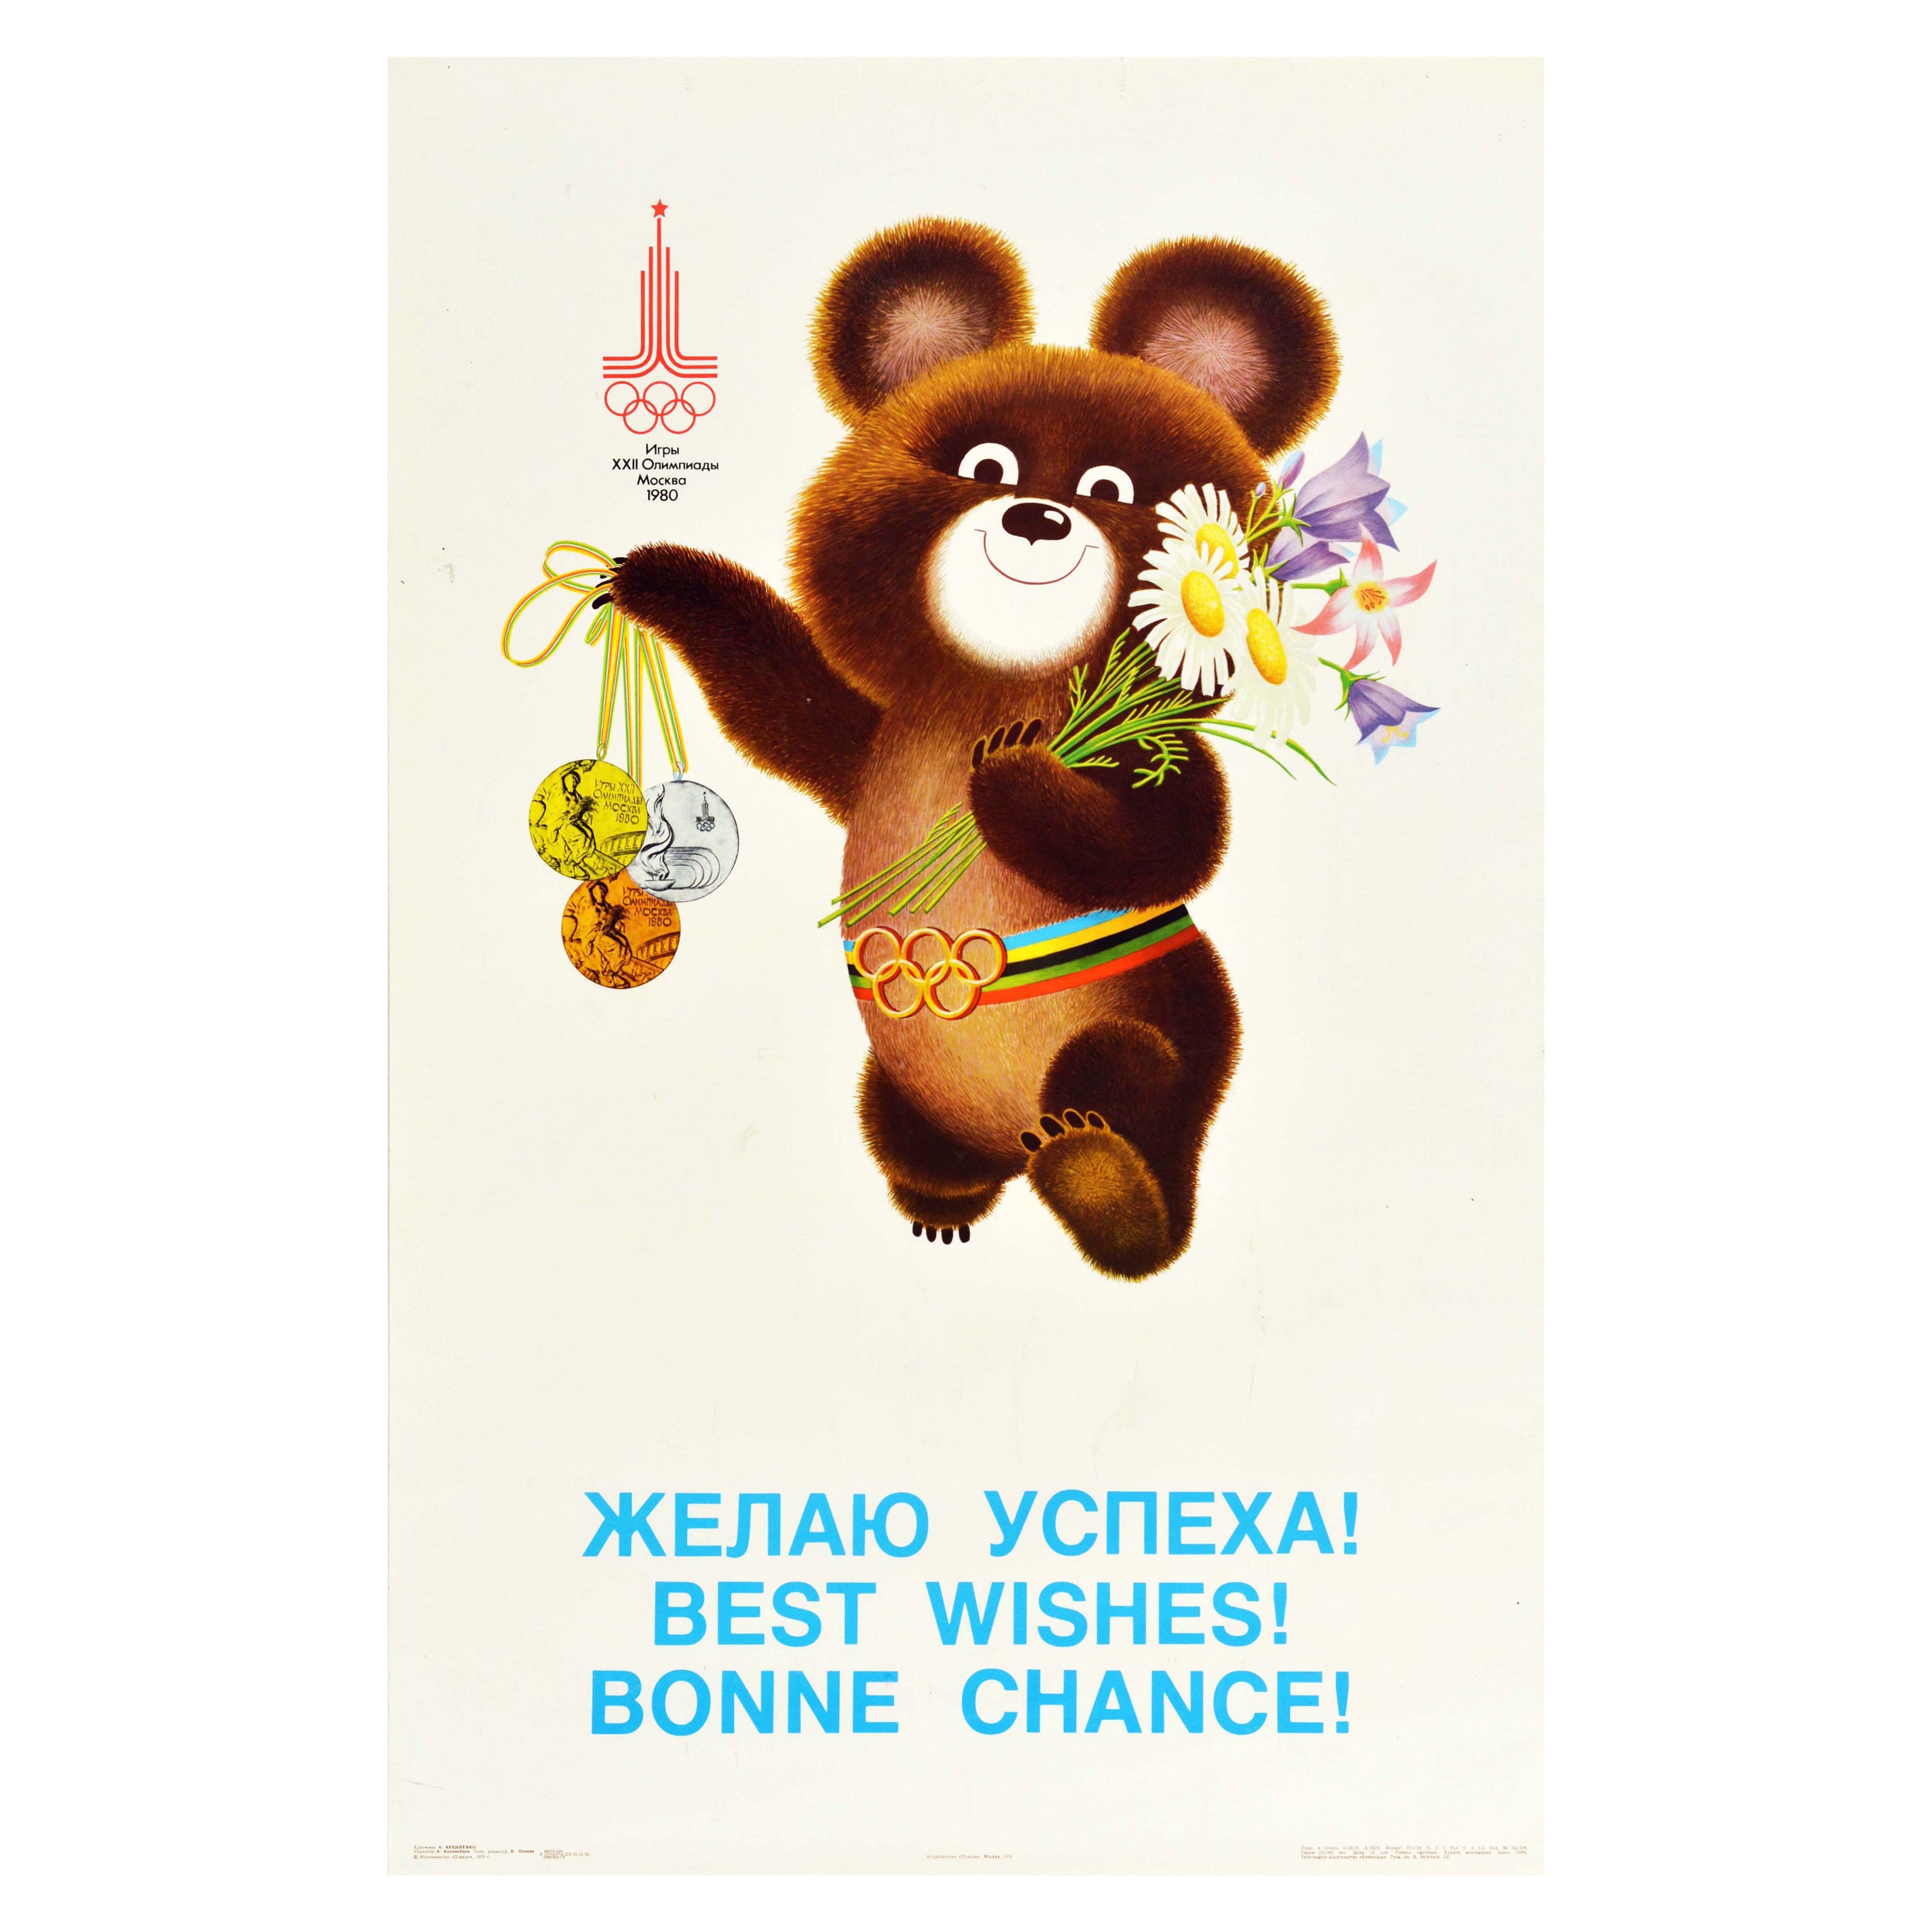 Original Vintage Sport Poster Moscow Olympics Misha Bear Best Wishes! Good Luck